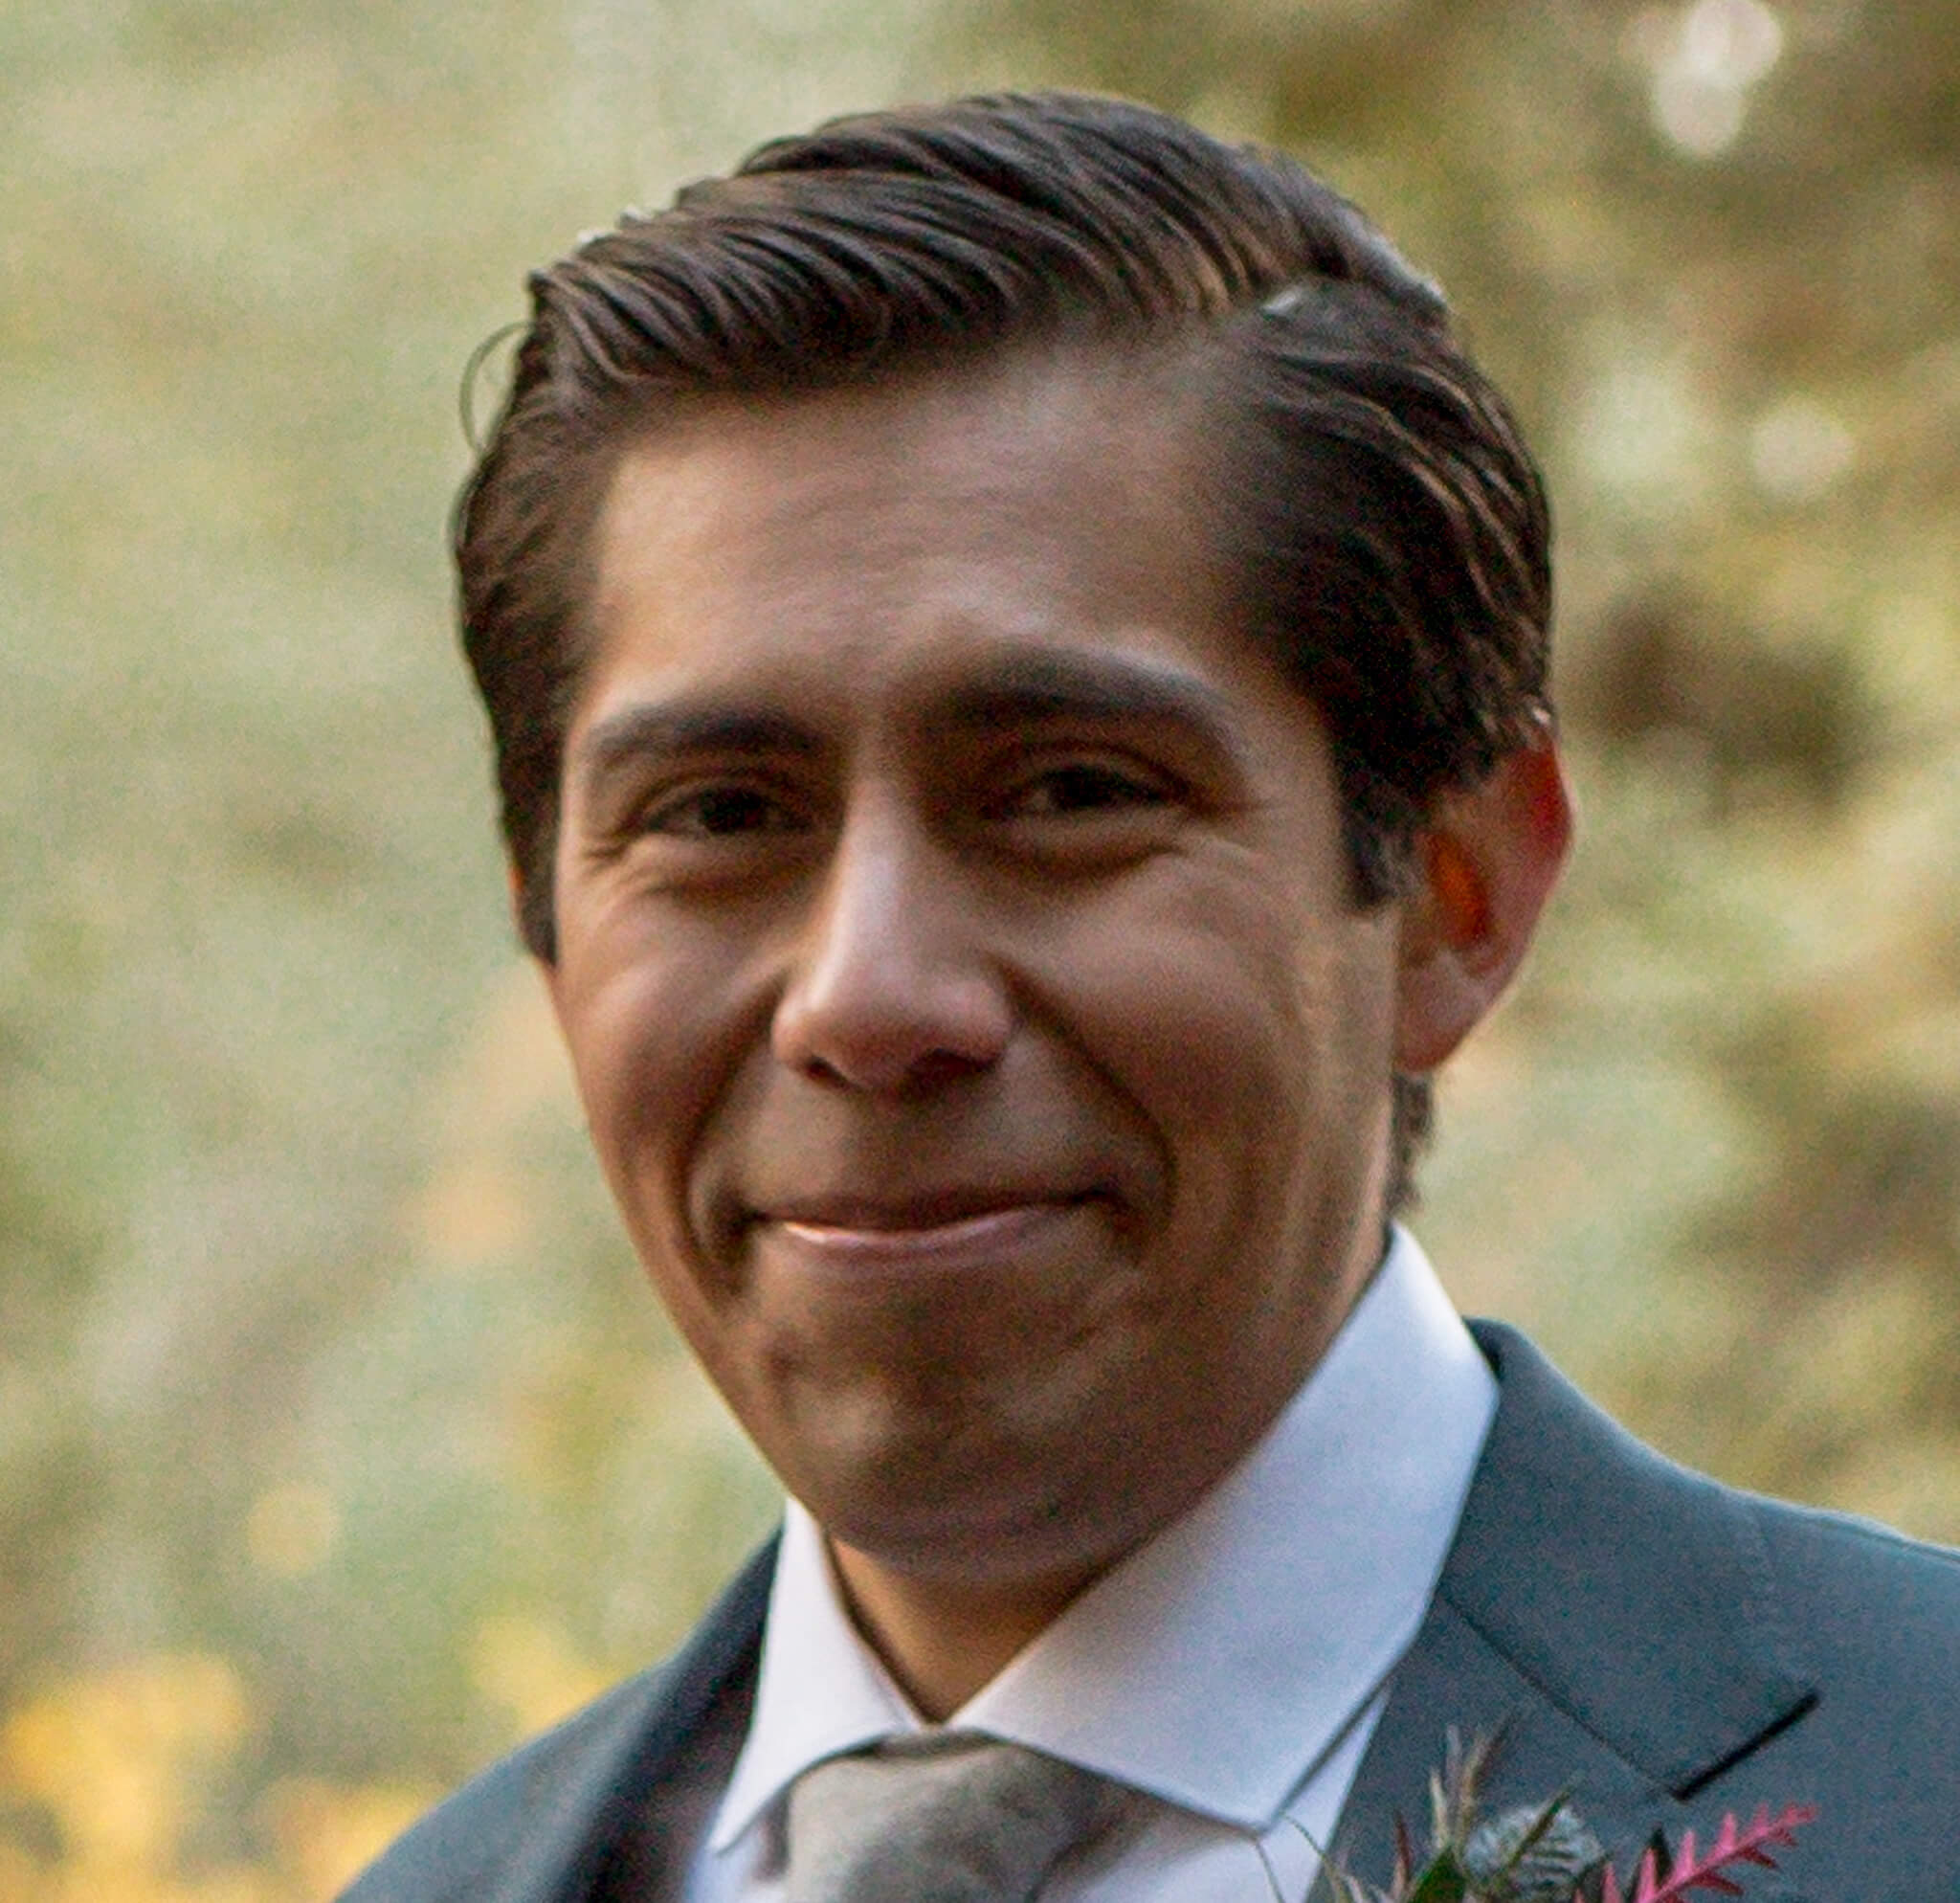 man with brown hair smiling, wearing suit